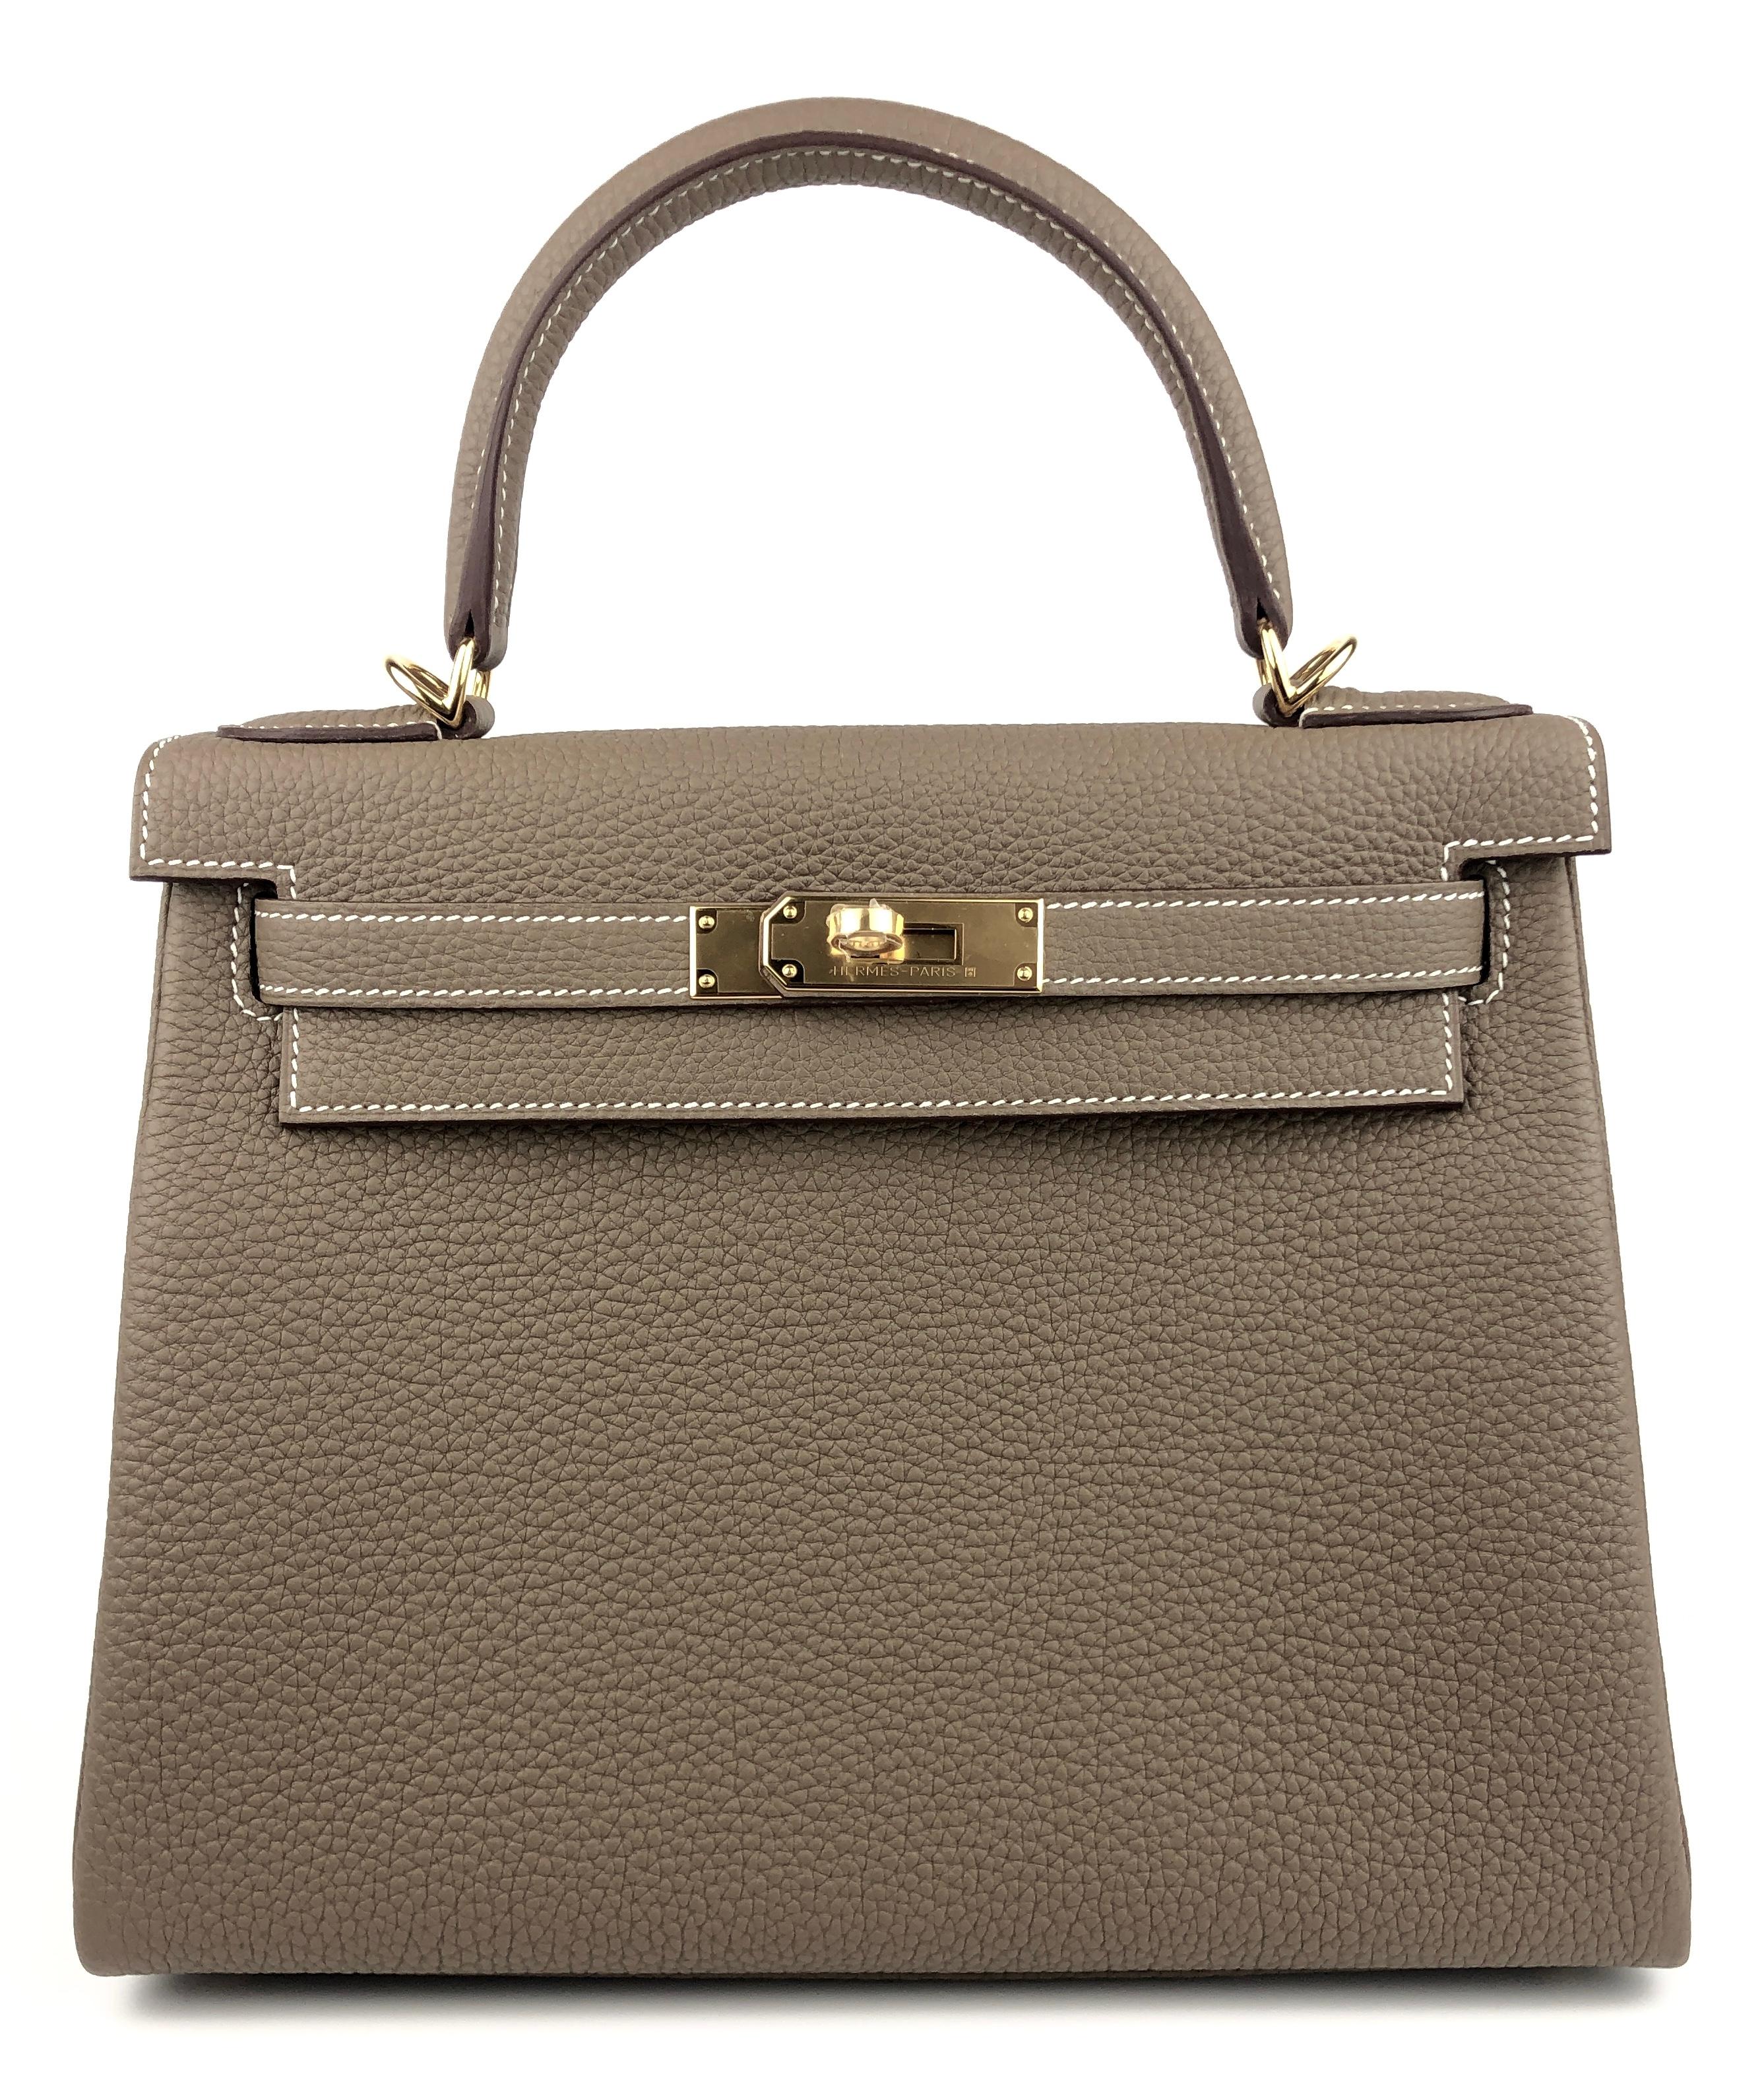 New 2023 Purchase RARE and most coveted, Hermes Kelly 28 Etoupe Gold Hardware. NEW U STAMP 2022. Includes all accessories and Box. 

Shop with confidence from Lux Addicts. Authenticity Guaranteed!